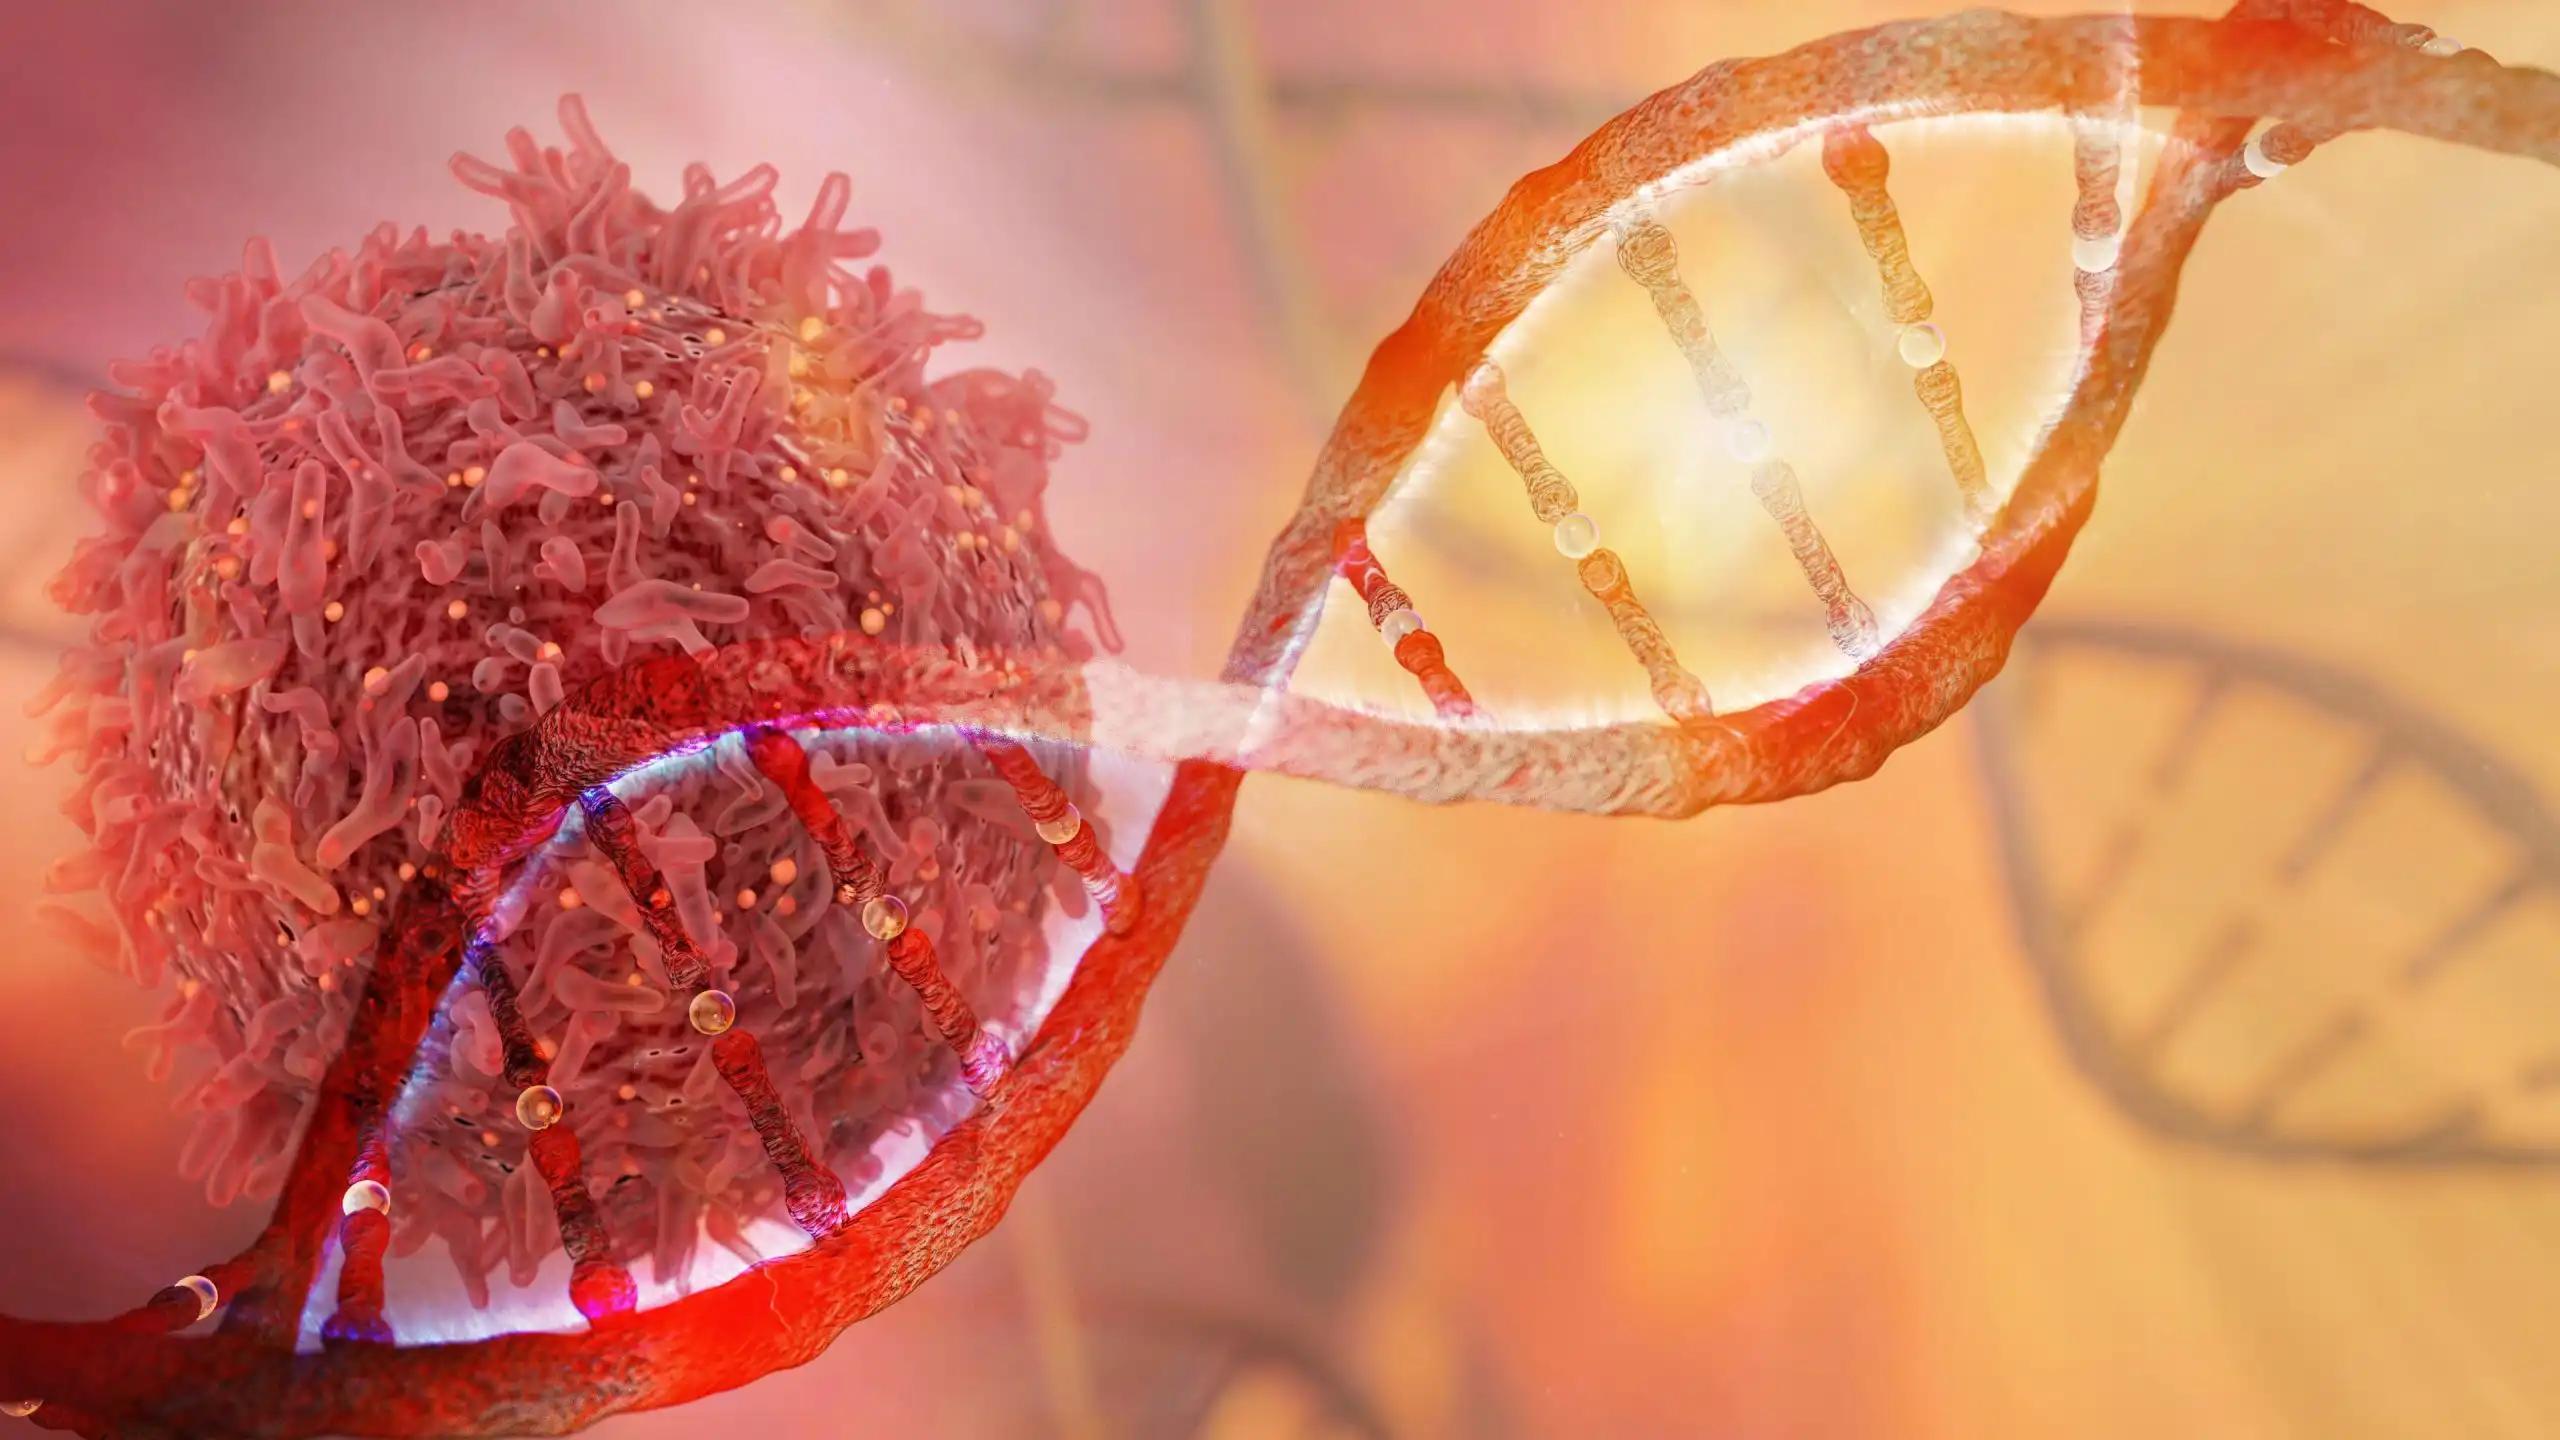 Genetic Alterations in DNA and Cancer Cells